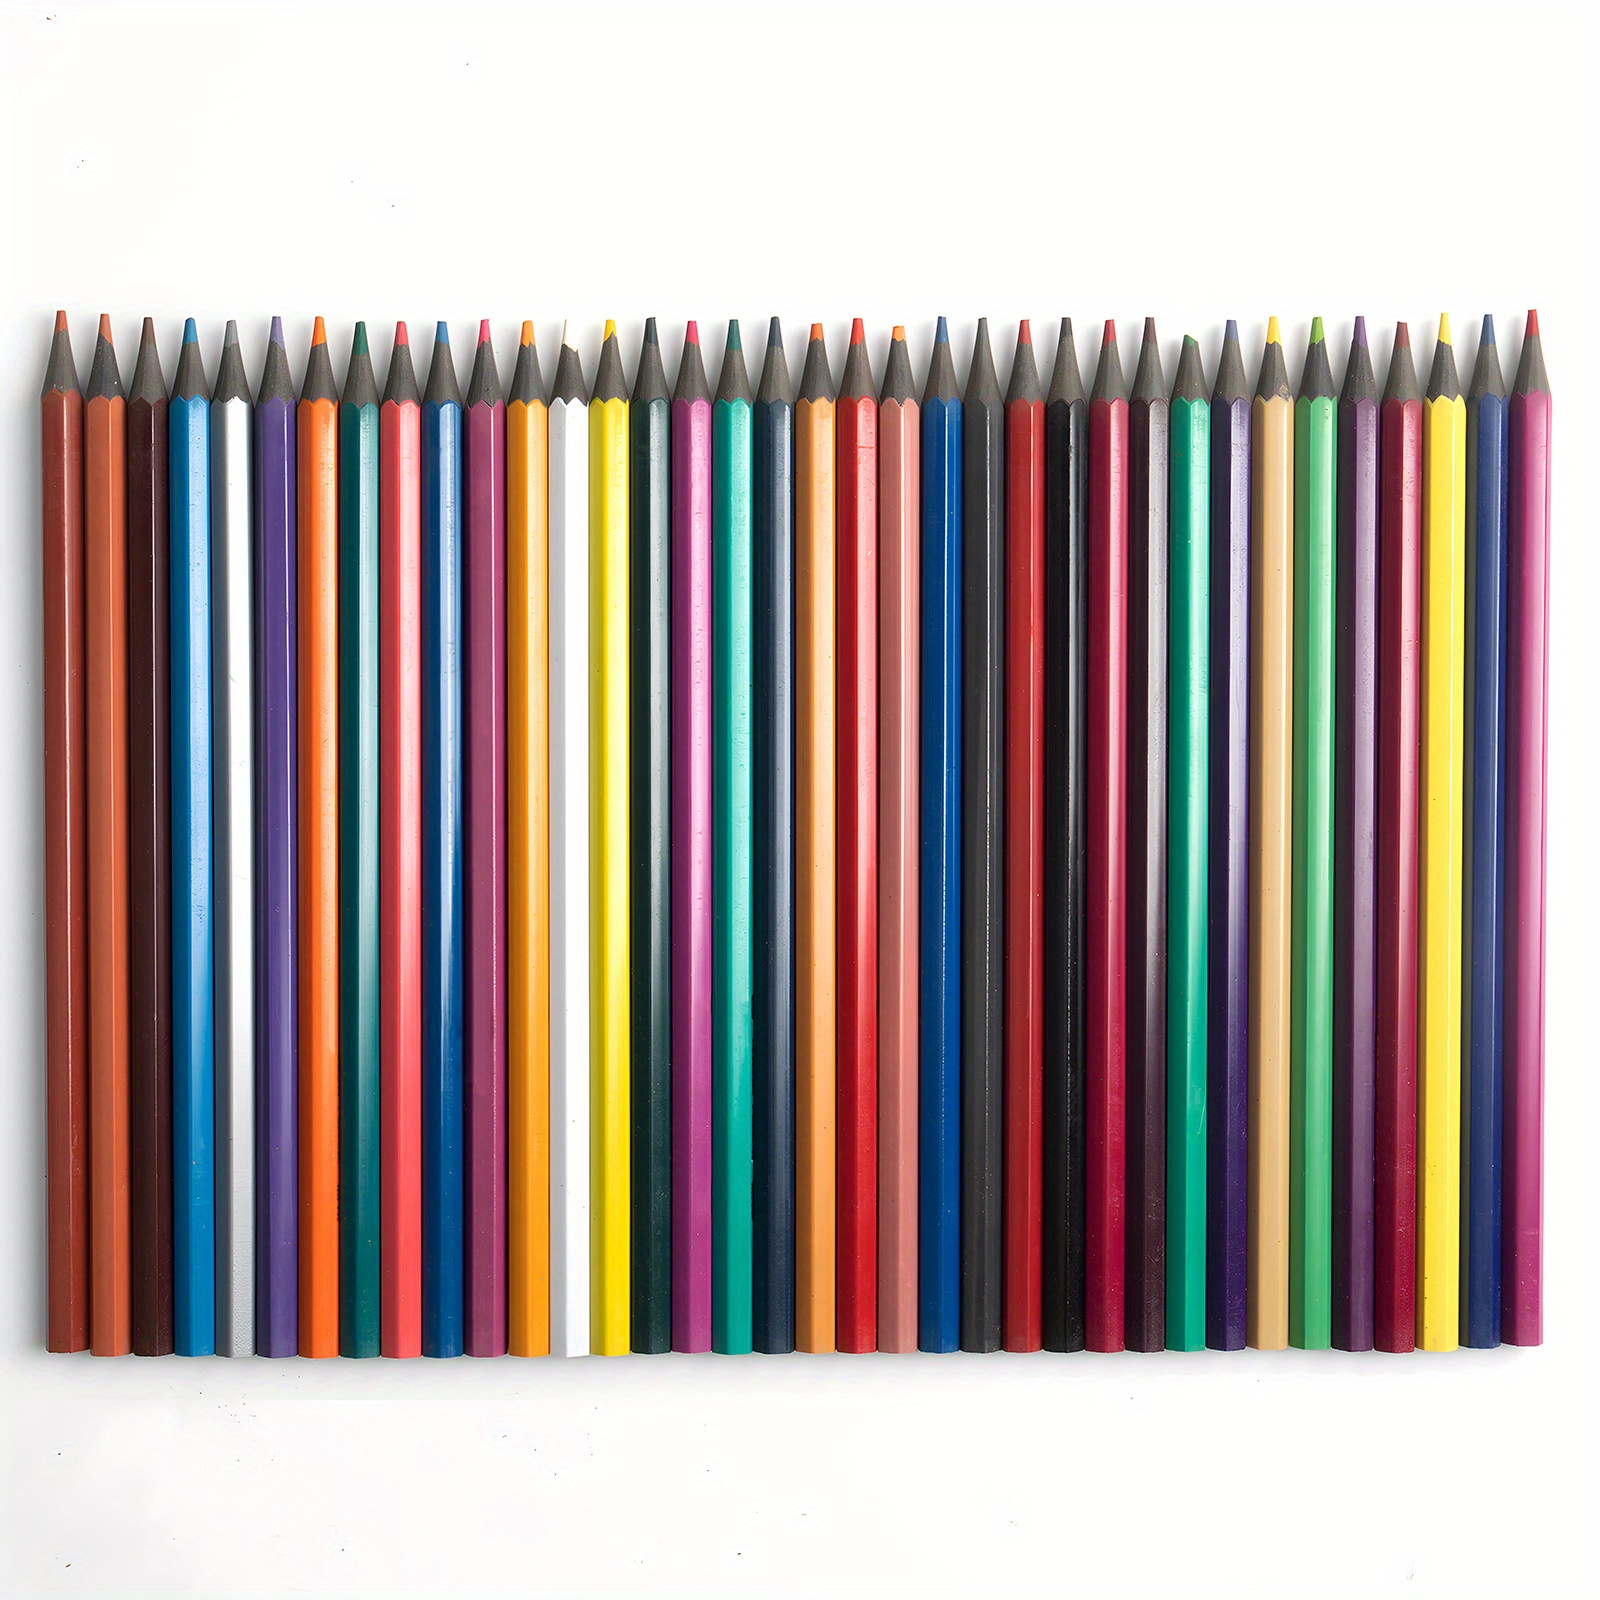 150 Colored Pencils, Color Pencil Set For Adult Coloring Books Artist  Drawing Sketching Crafting